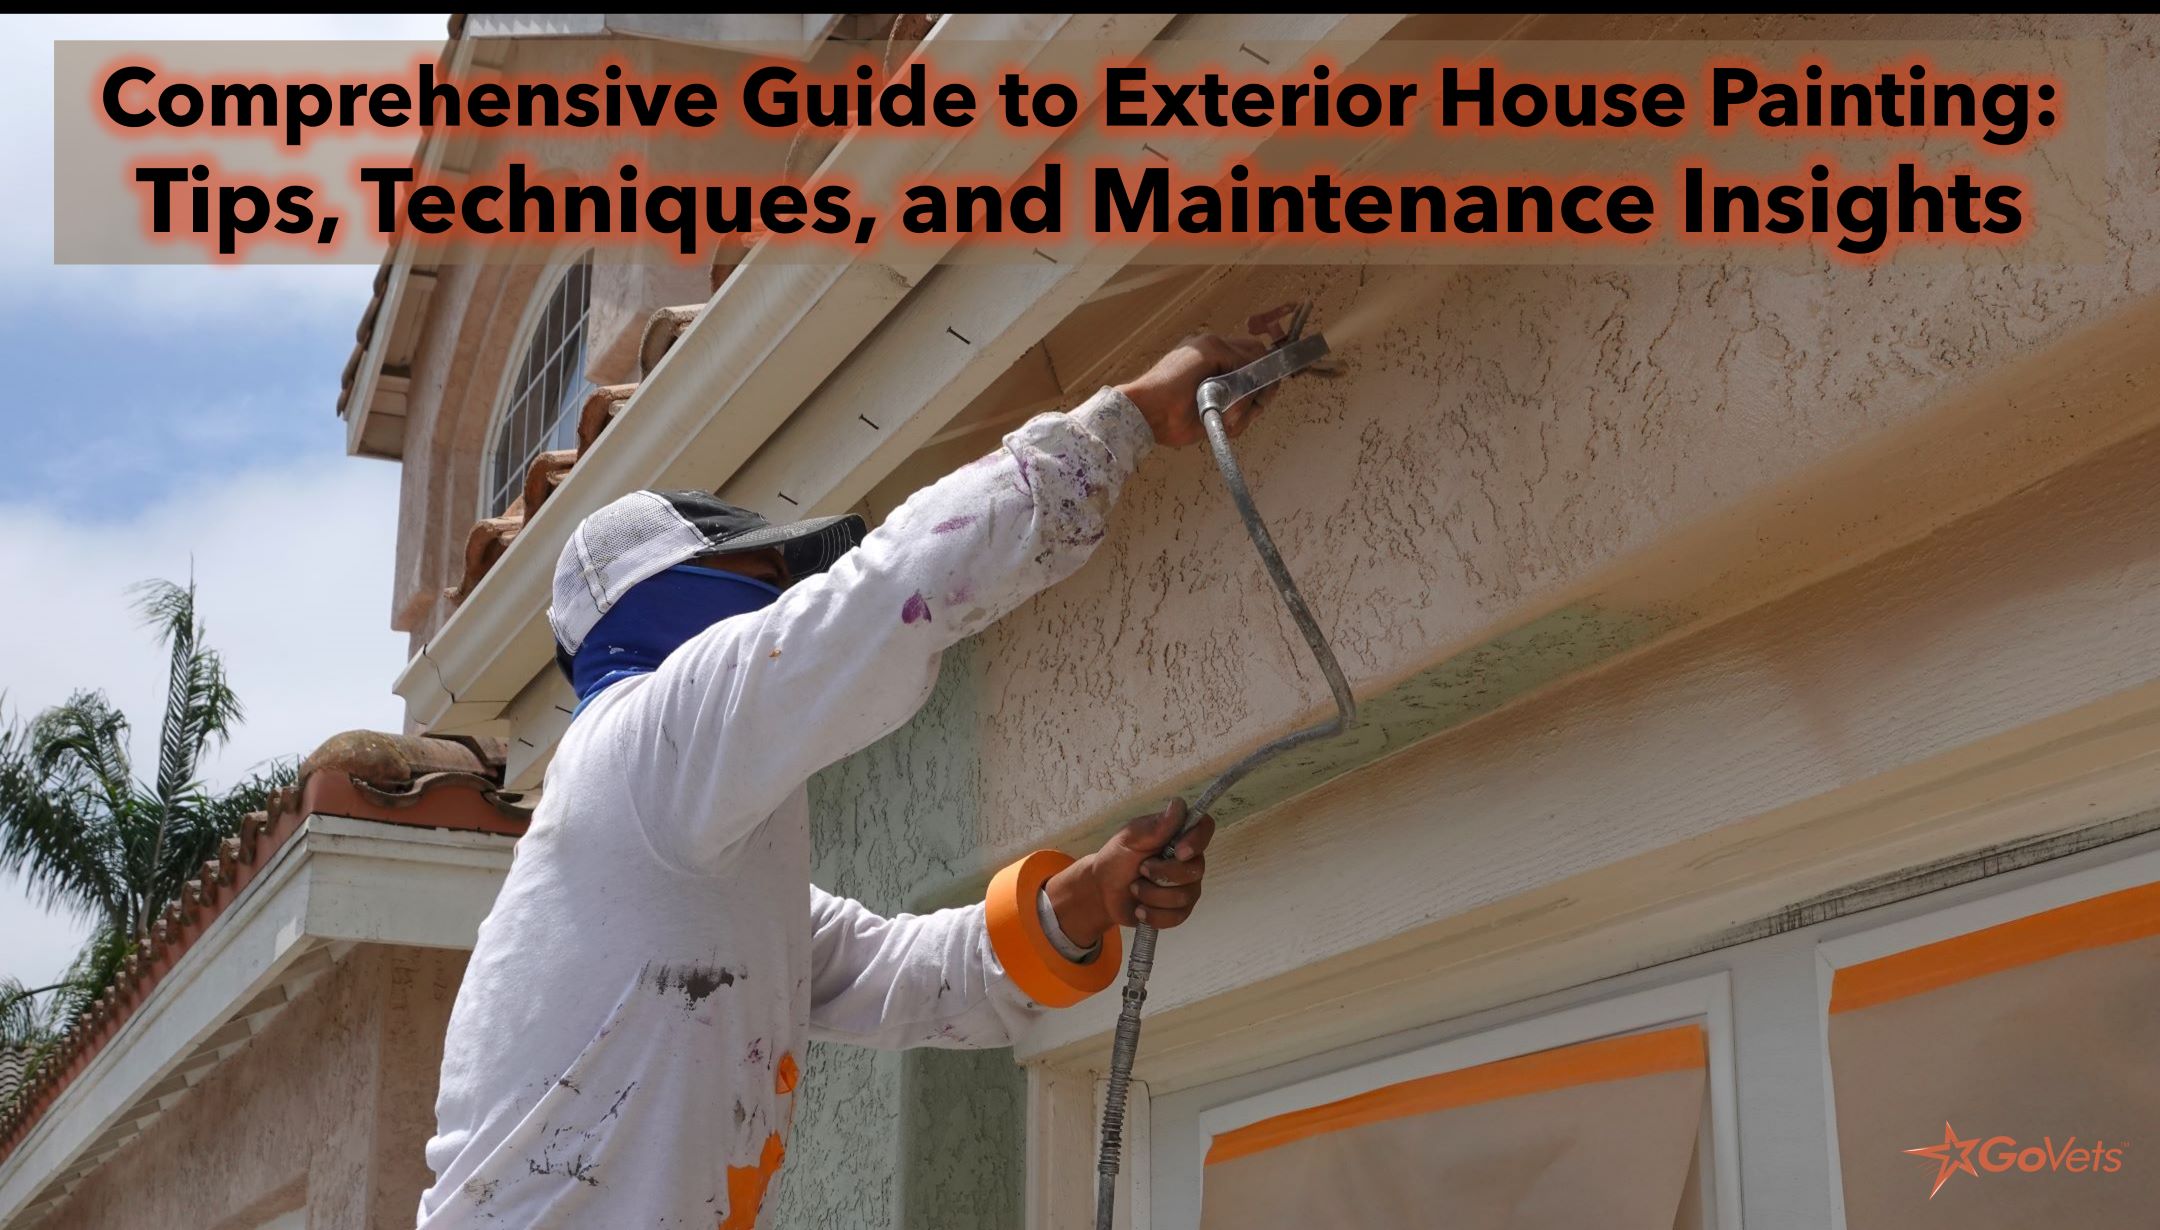 Comprehensive Guide to Exterior House Painting: Tips, Techniques, and Maintenance Insights